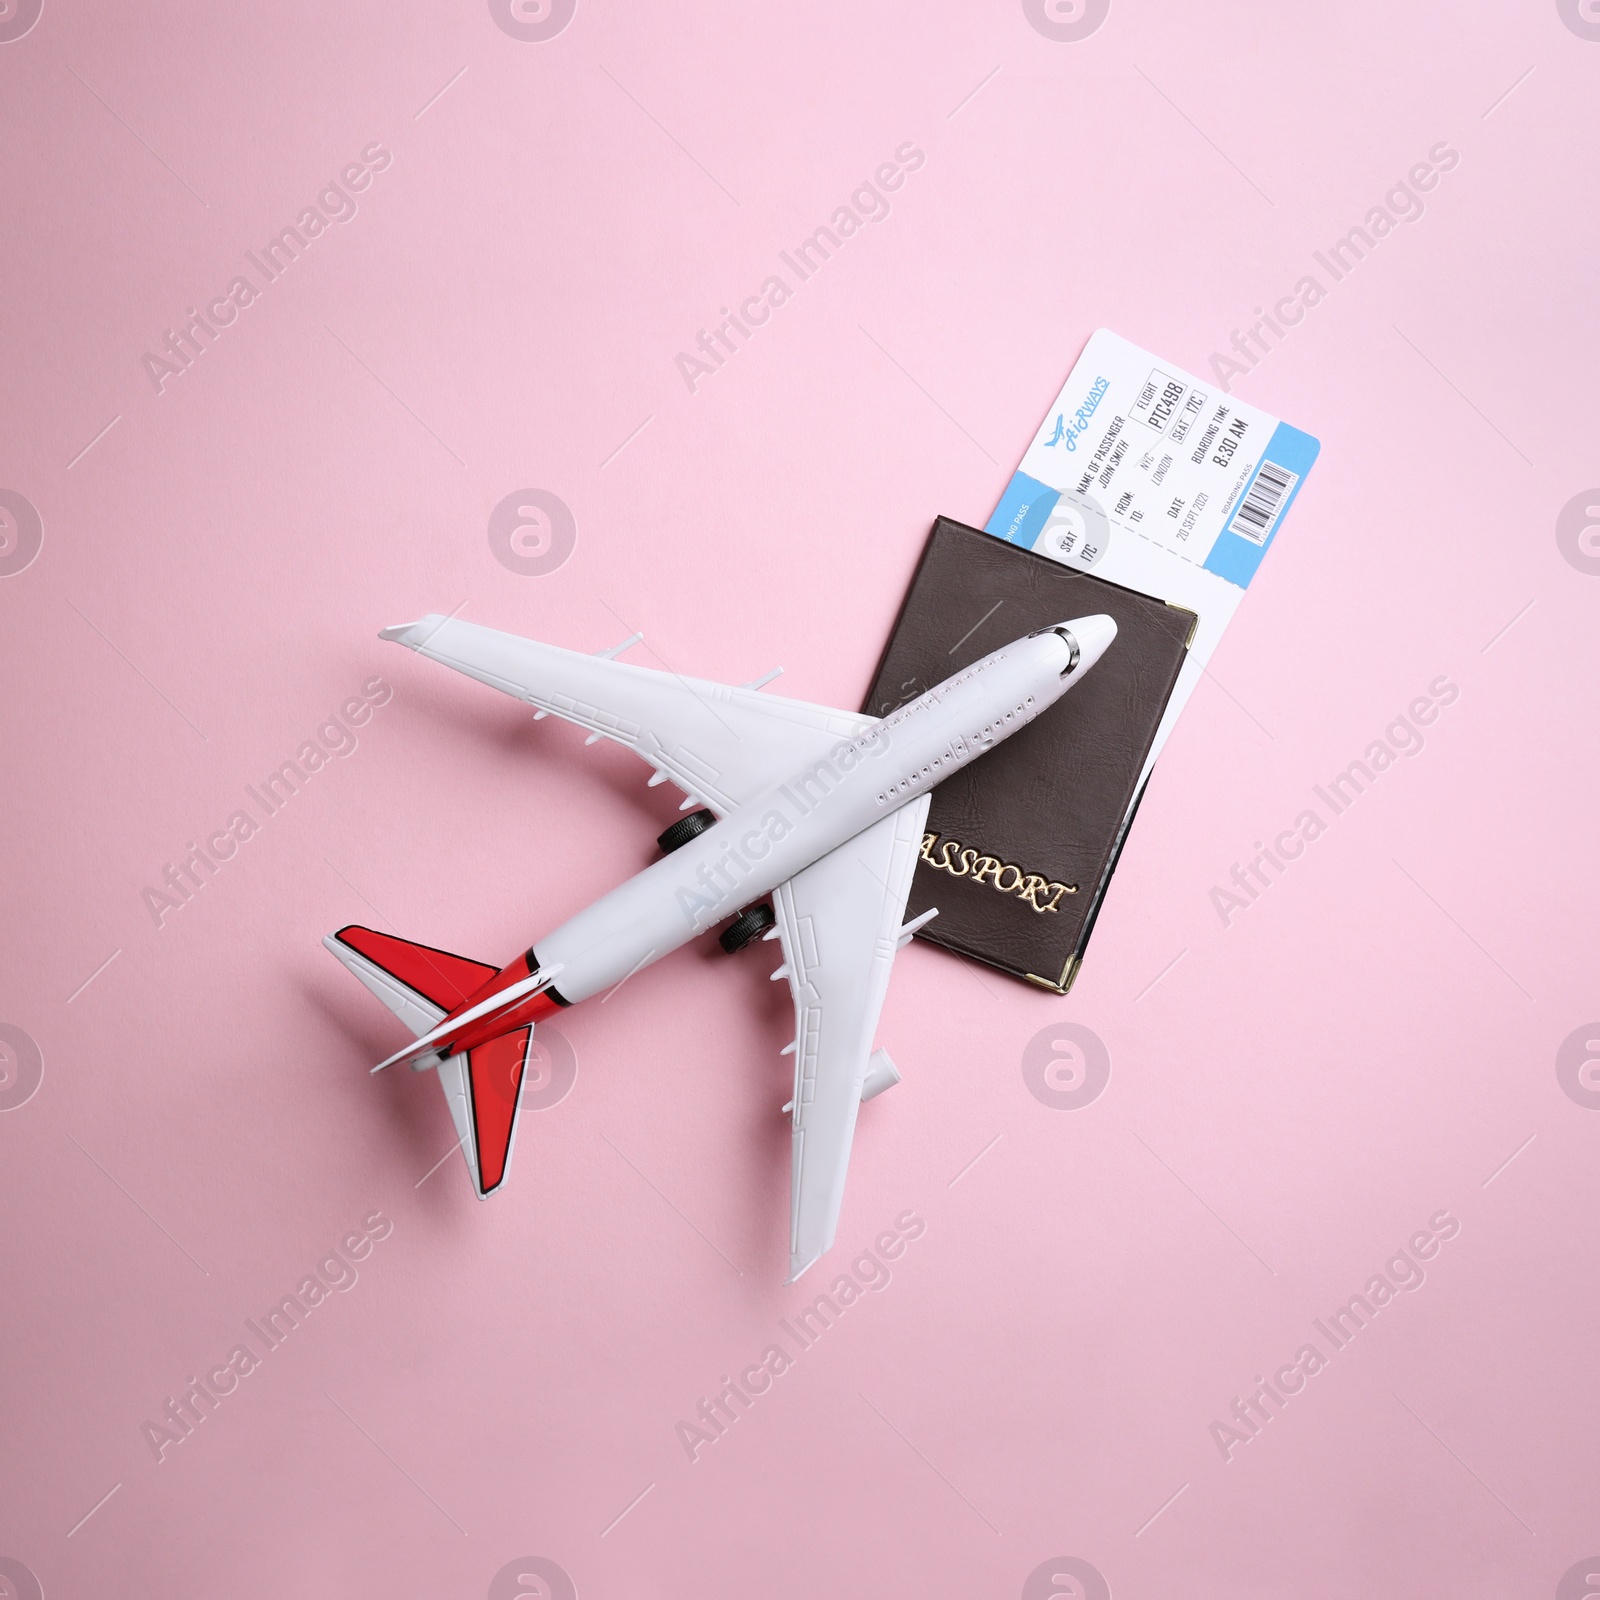 Photo of Toy airplane and passport with ticket on pink background, flat lay